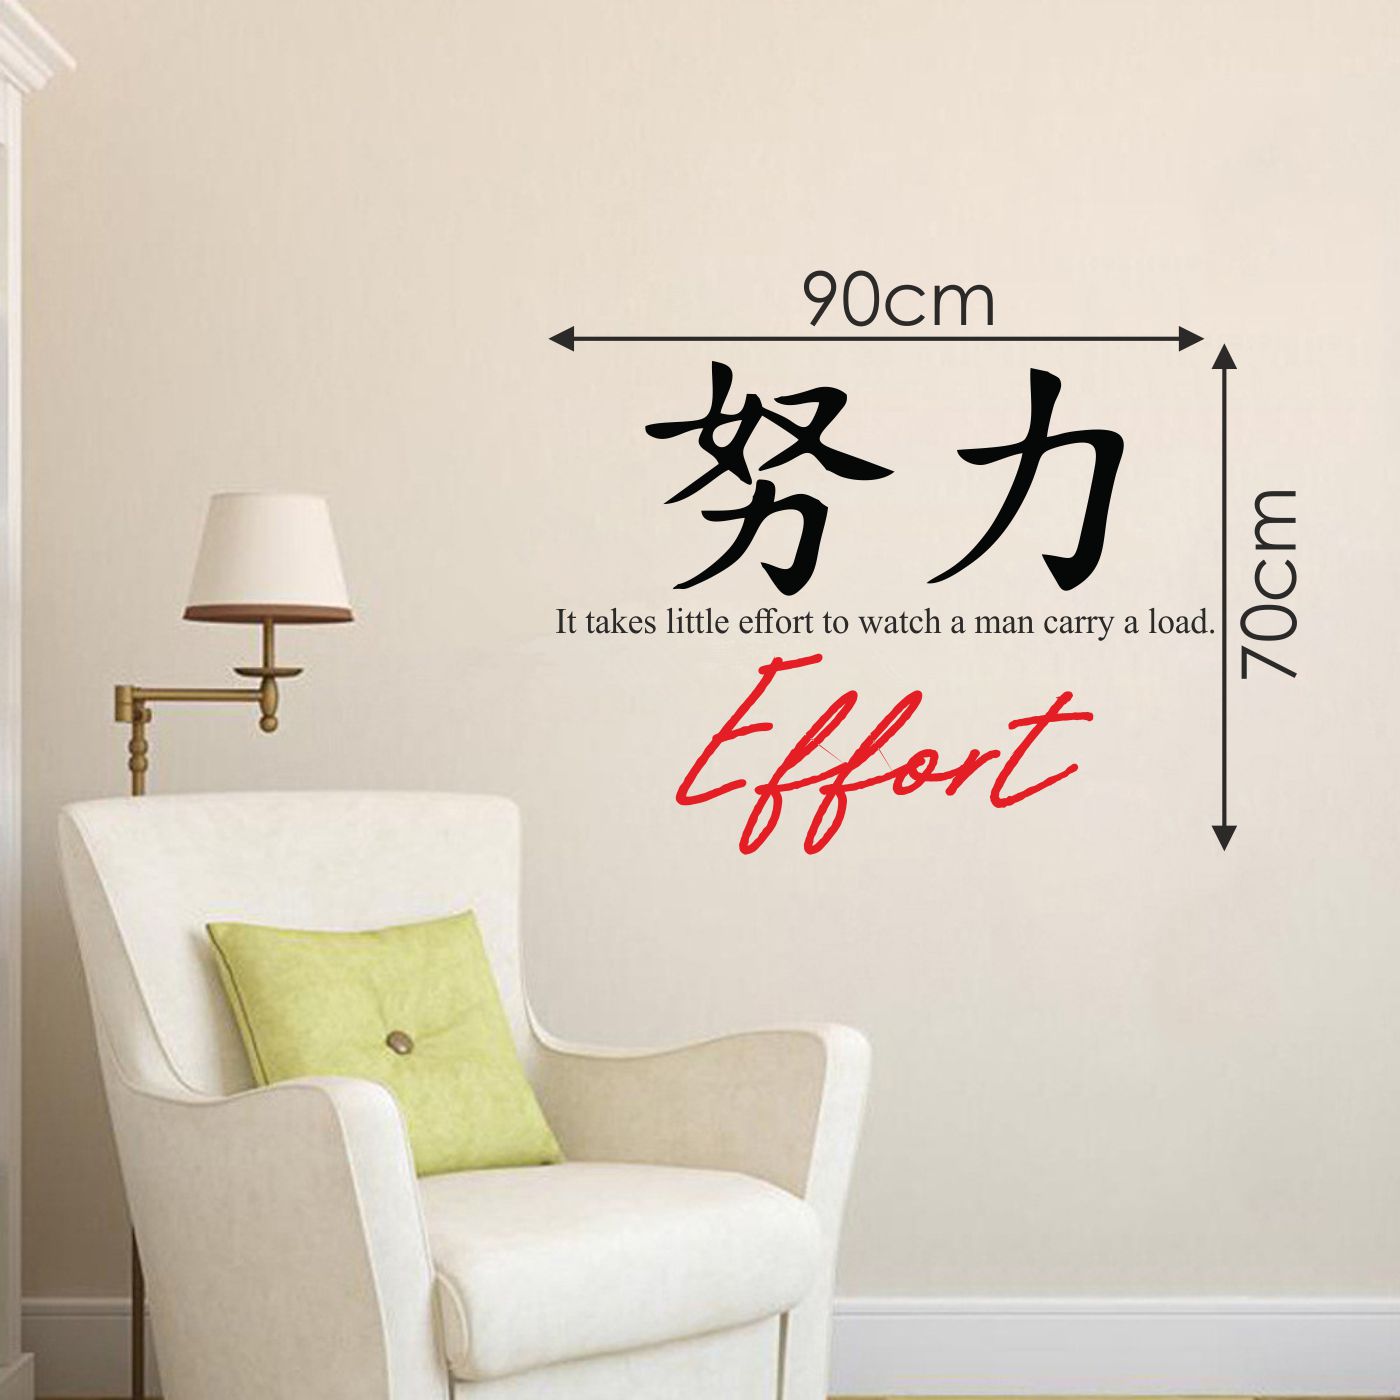 ORKA Chinese Wall Decal Sticker 11  